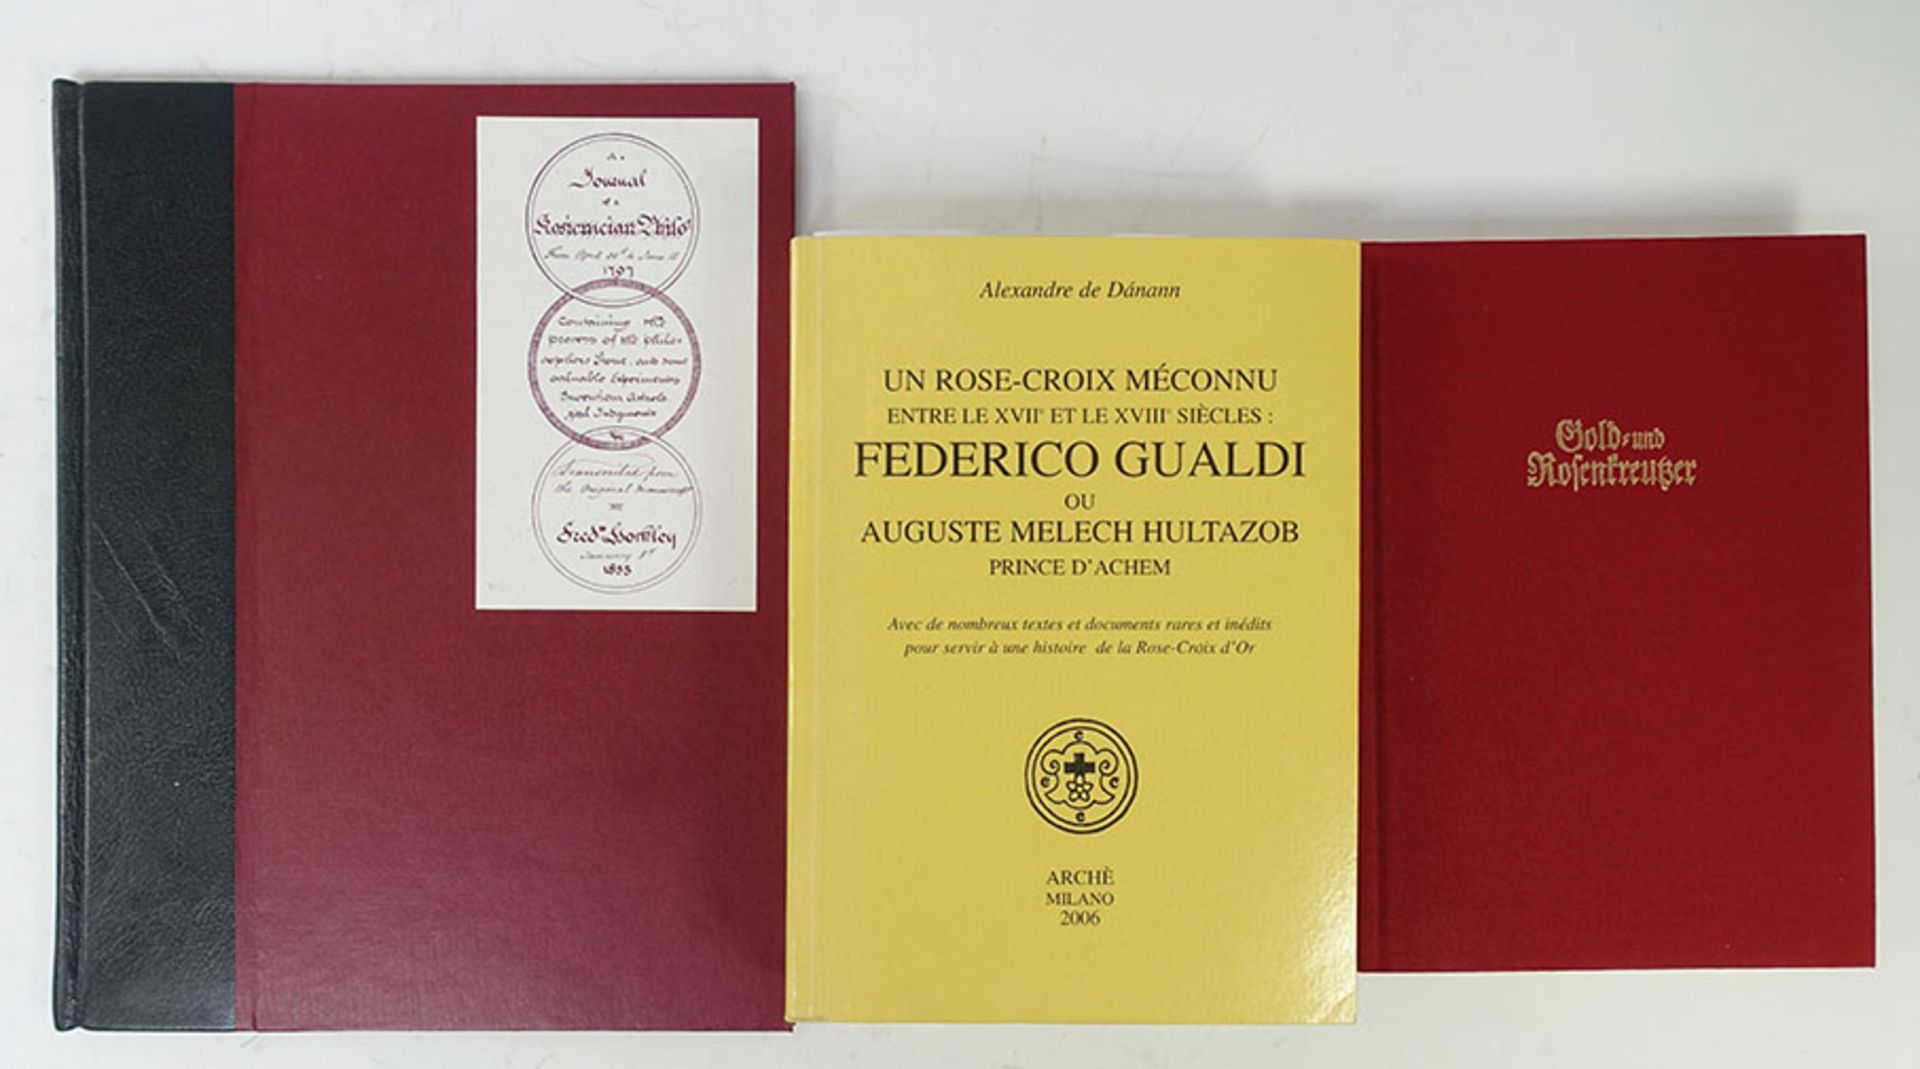 ROSICRUCIANS -- HOCKLEY, Fr. A journal of a Rosicrucian Philos(ophus) from April 30th to June 15